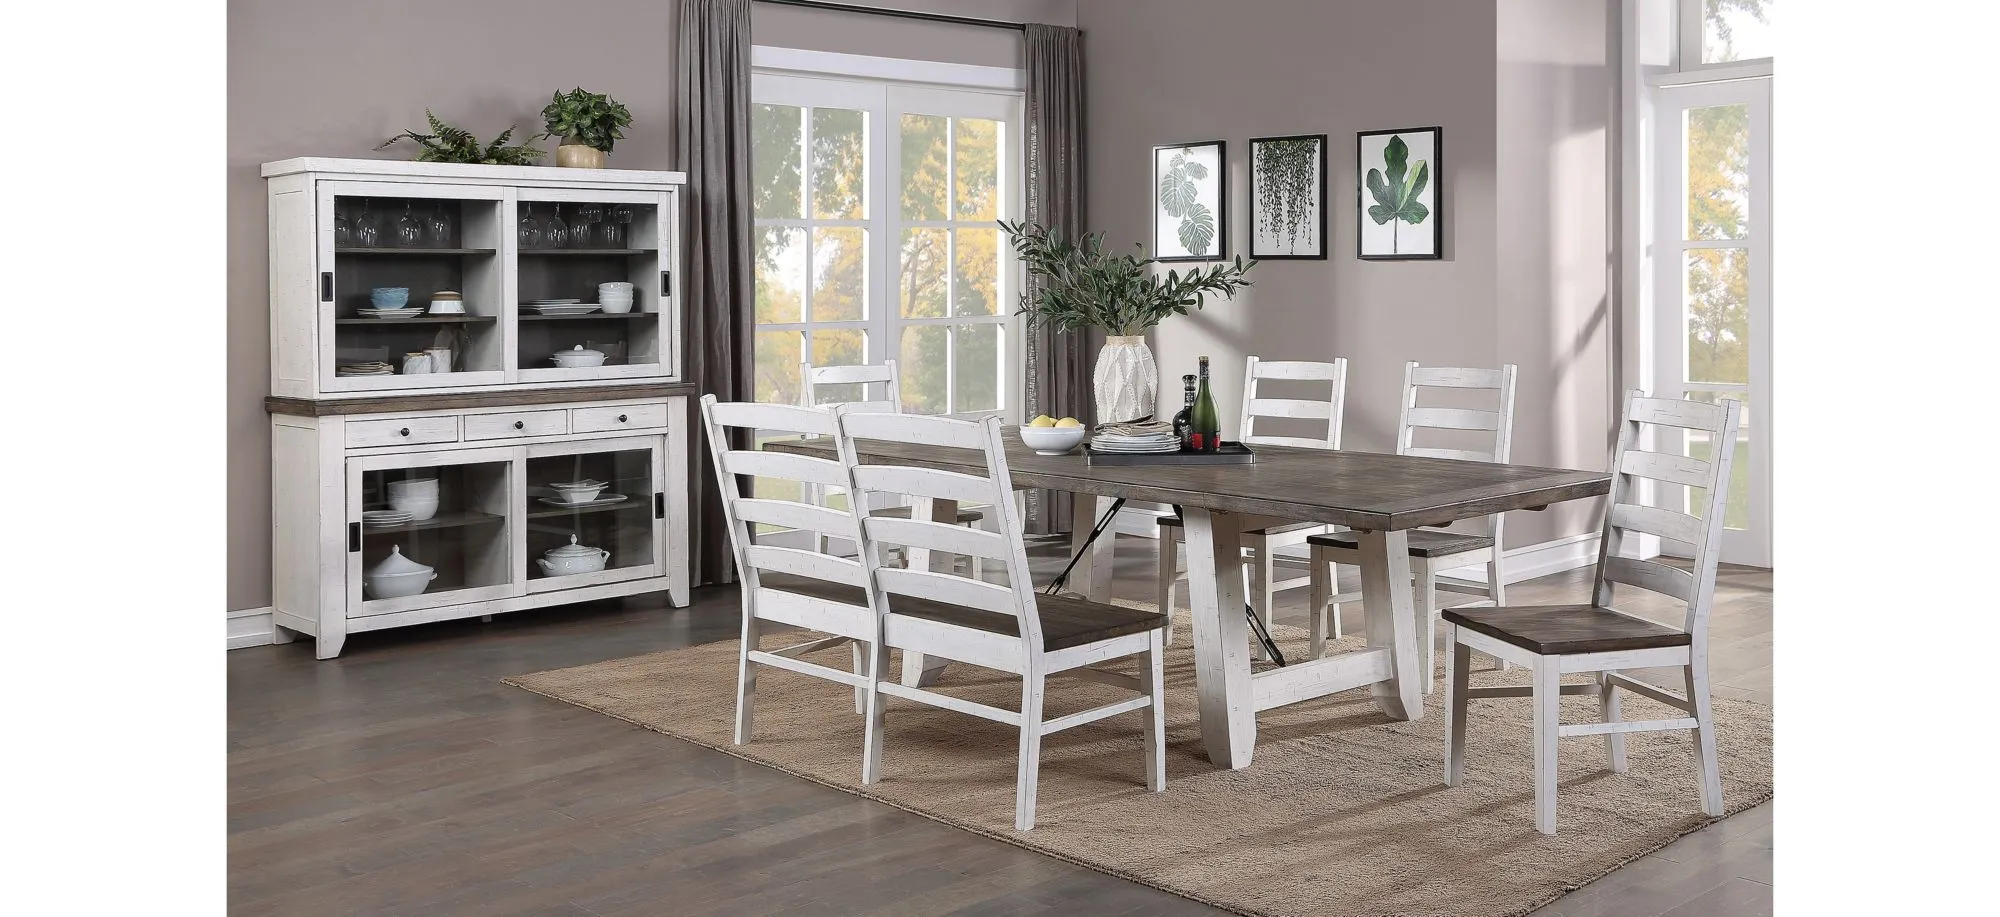 La Sierra 6-pc. Trestle Dining Set with Bench in White/Gray by ECI